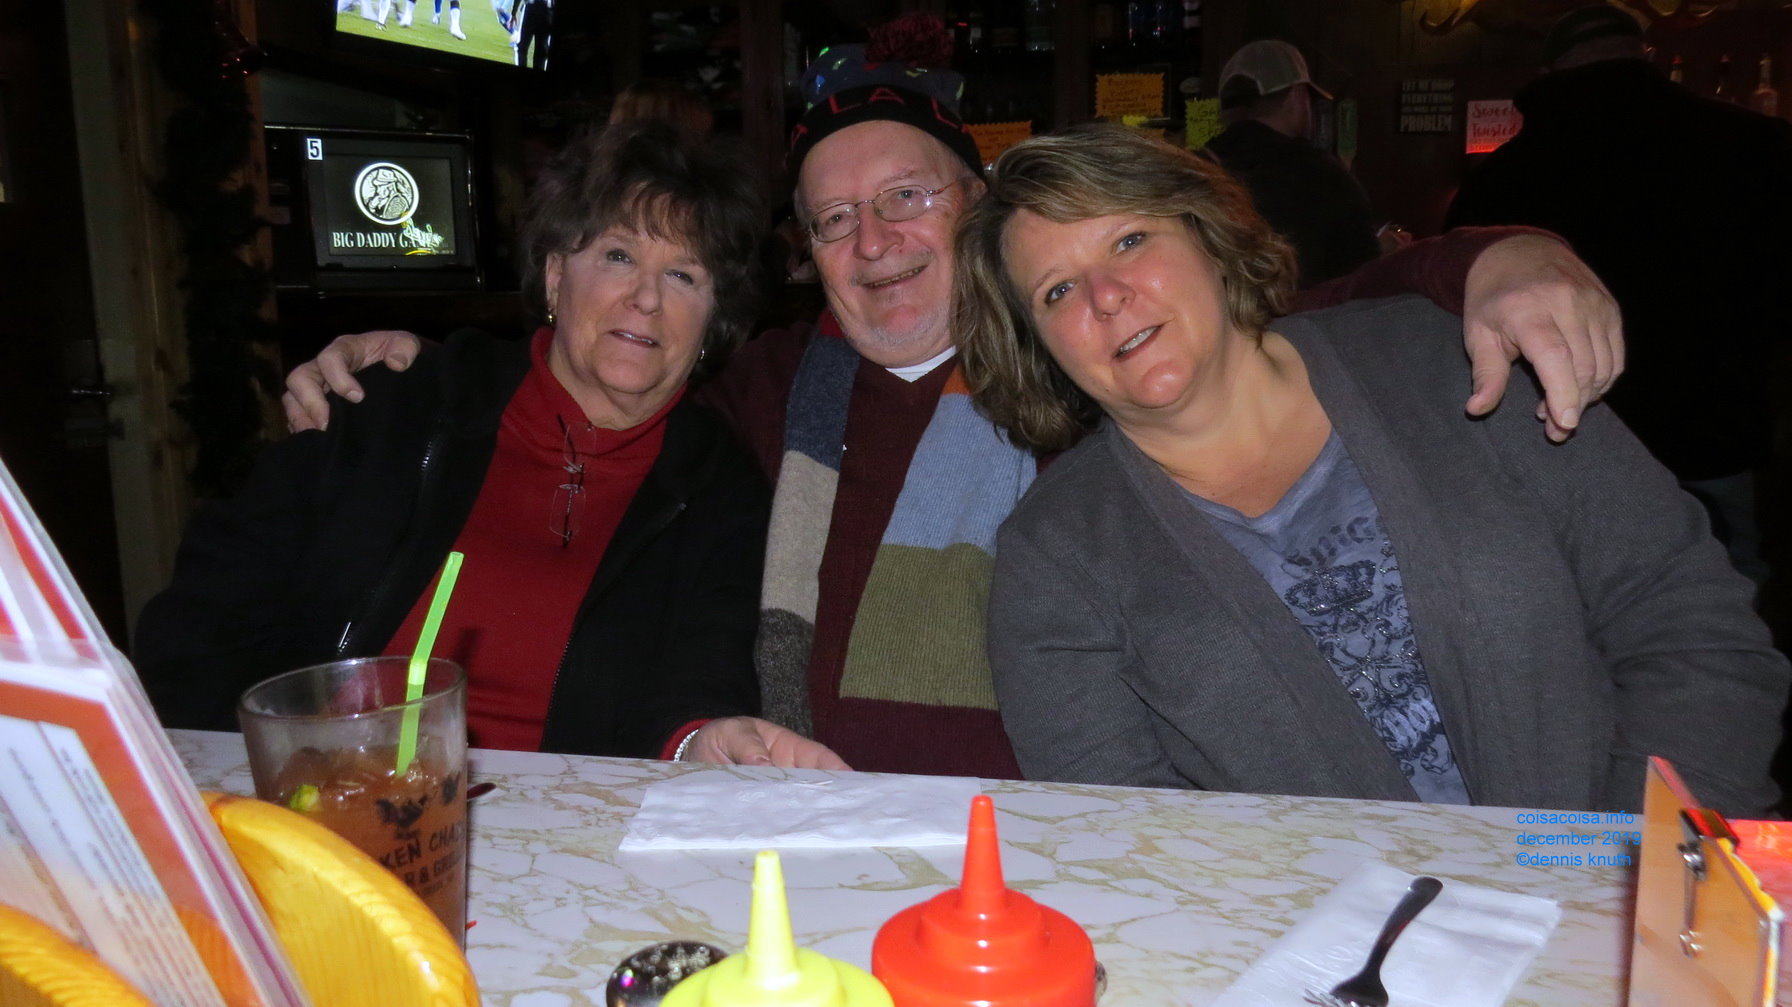 Peggy, Dennis Knuth, Debbie at the Birthday Party Table